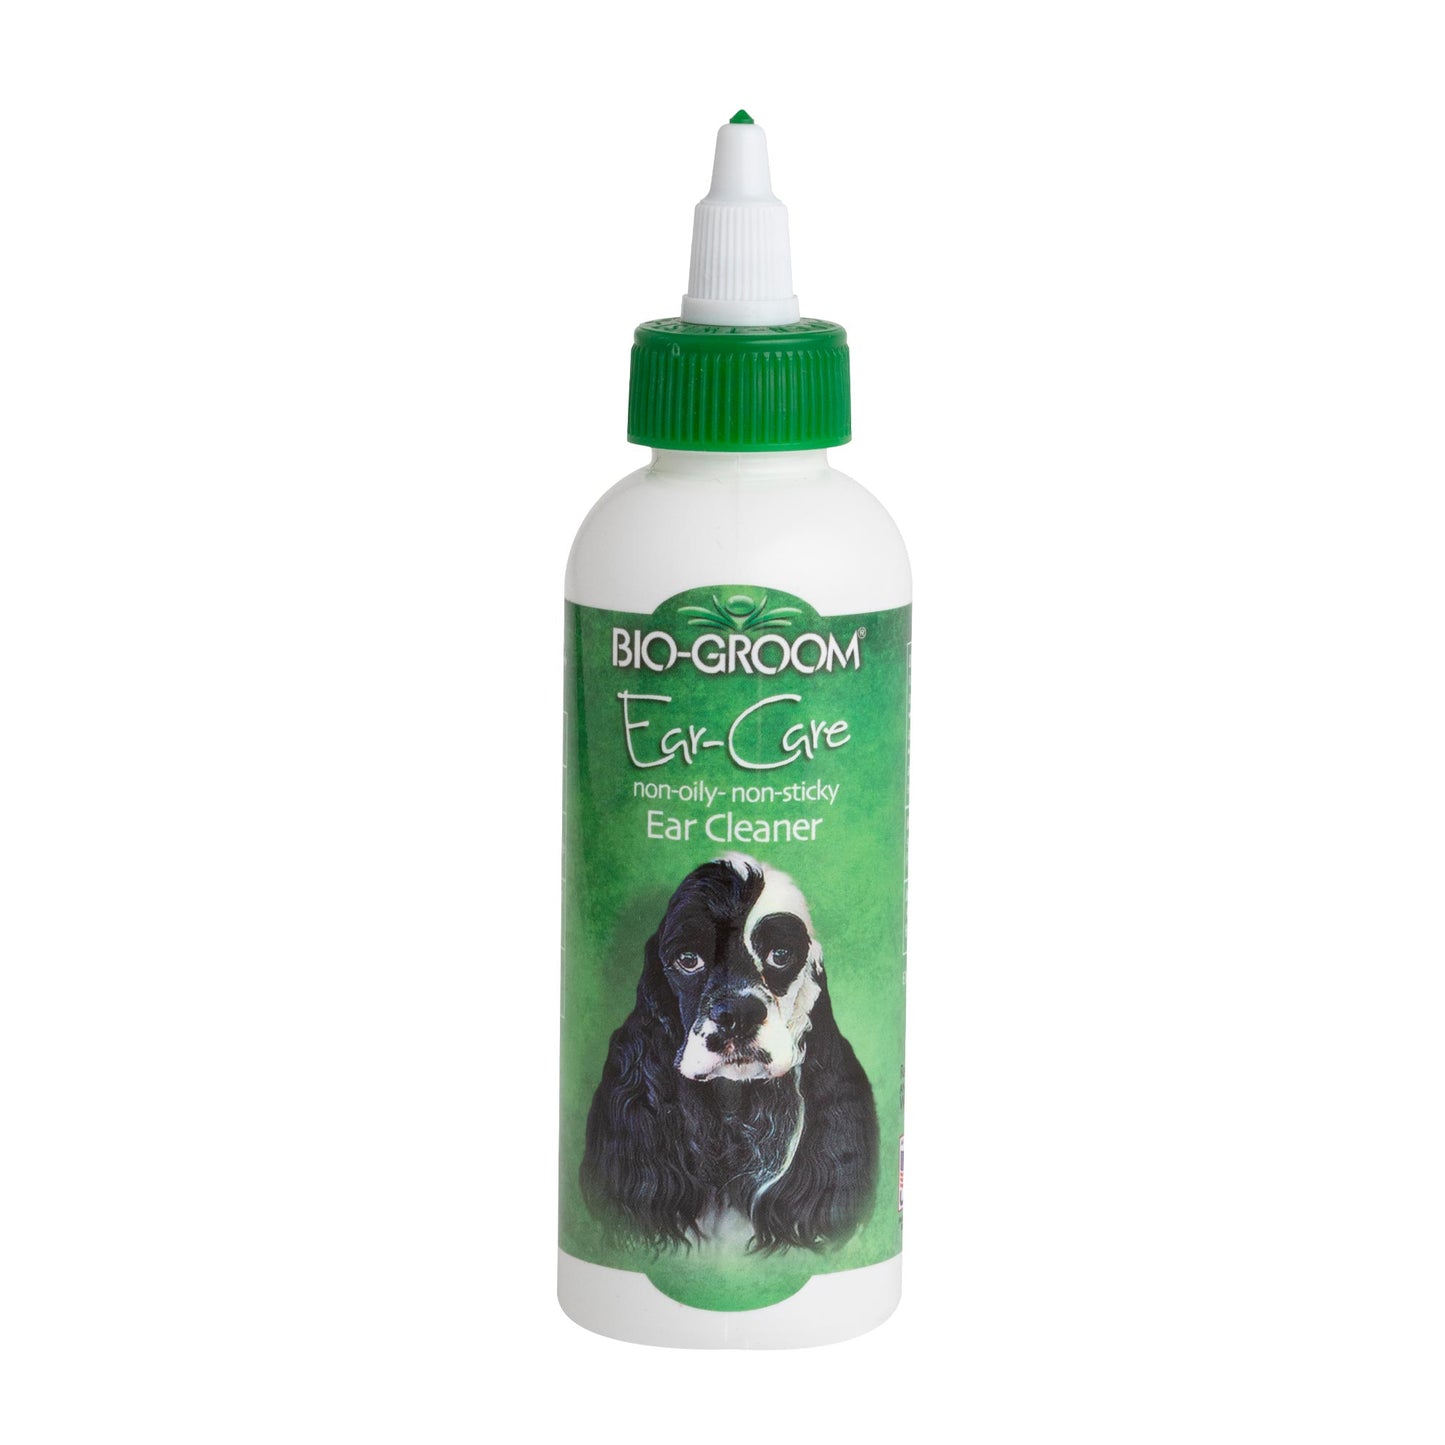 Ear care cleaner